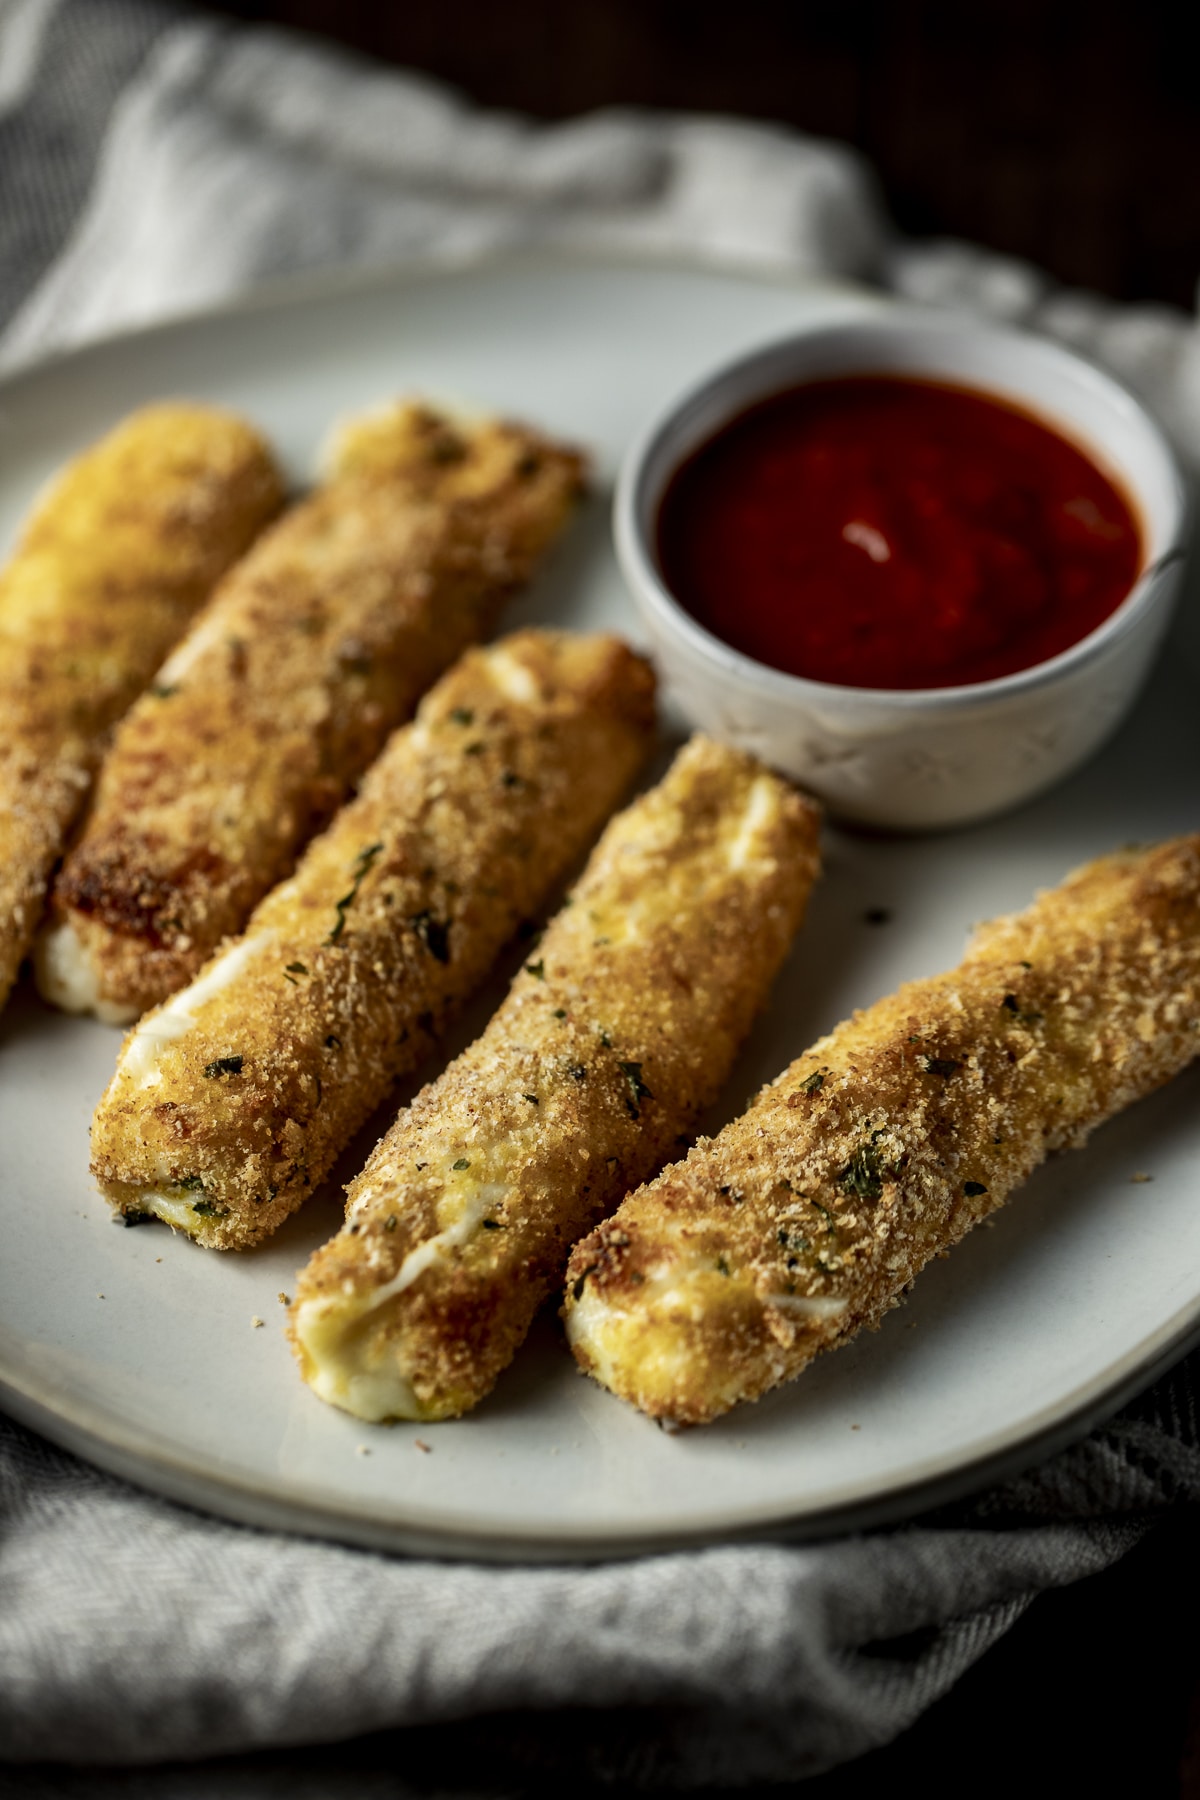 Side view of mozzarella sticks on a plate with marinara sauce.